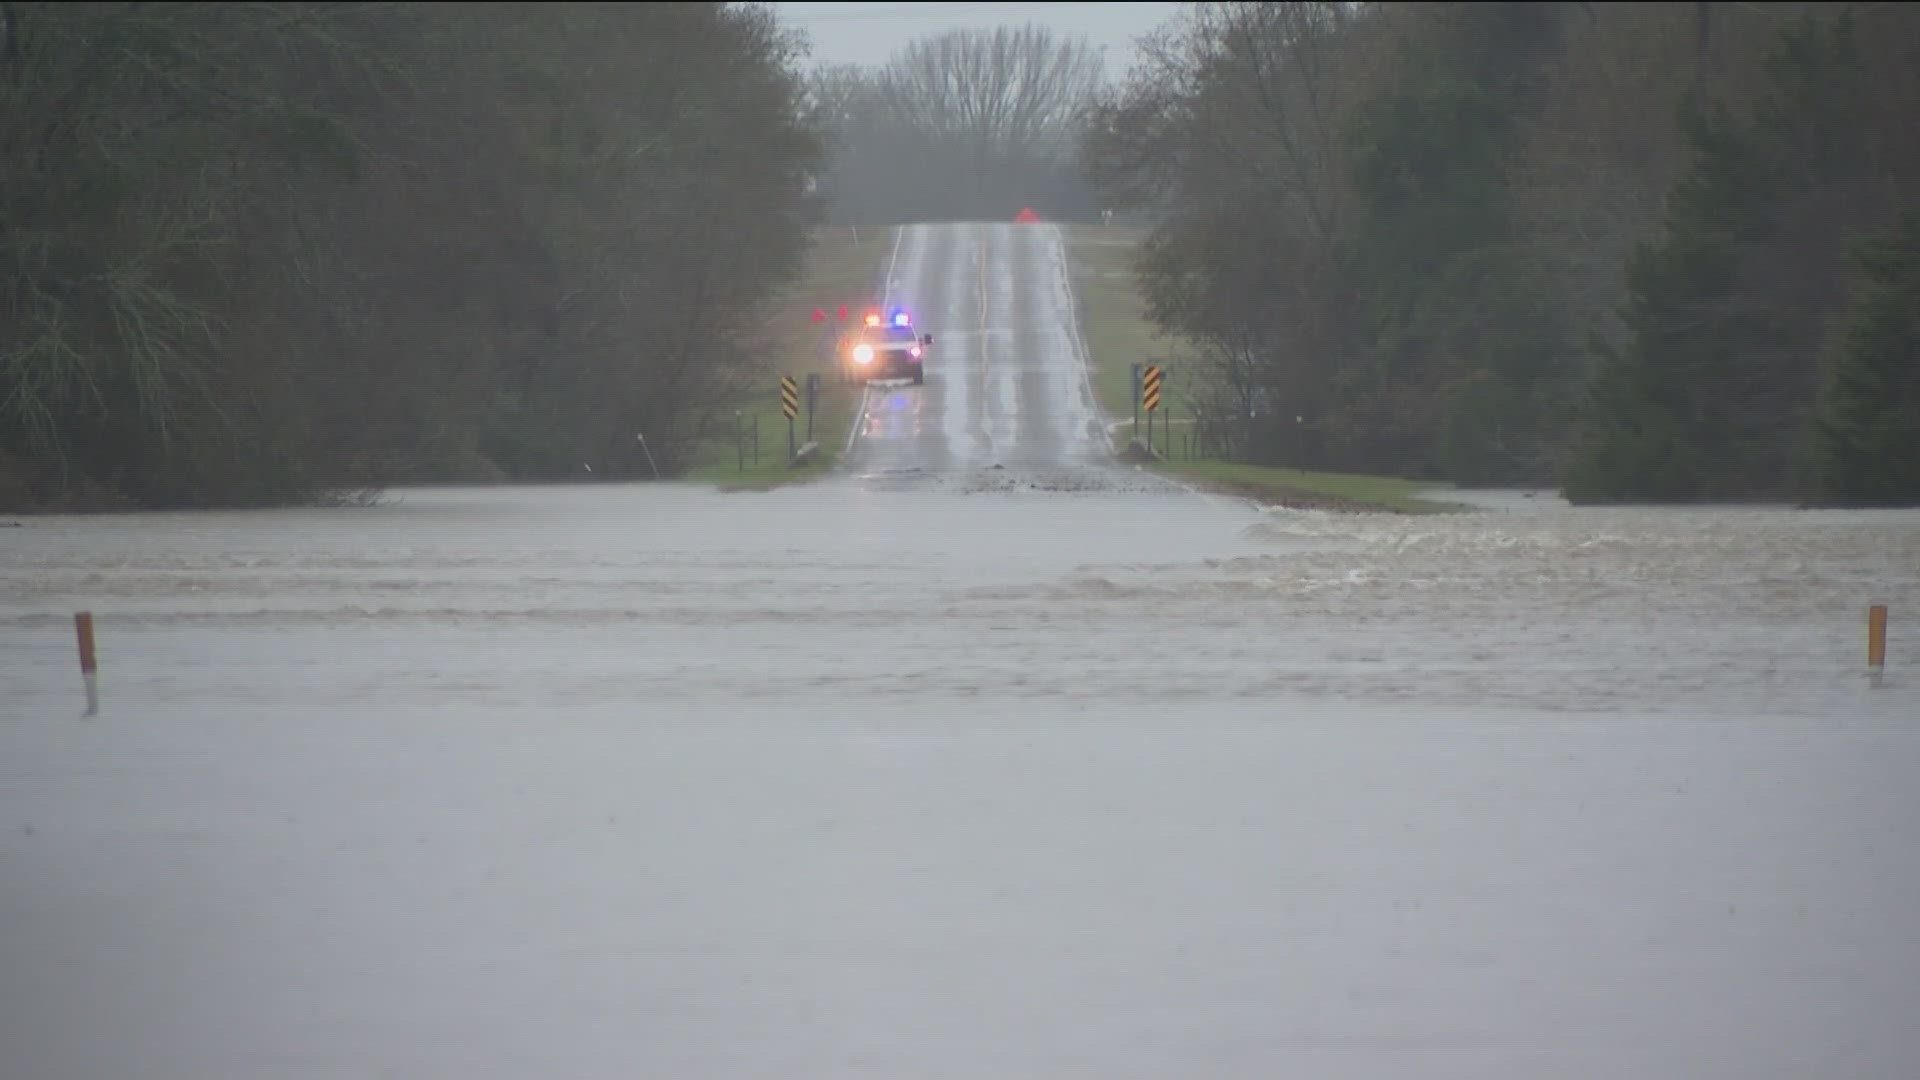 Wednesday's severe weather resulted in major flooding in areas east of Austin.